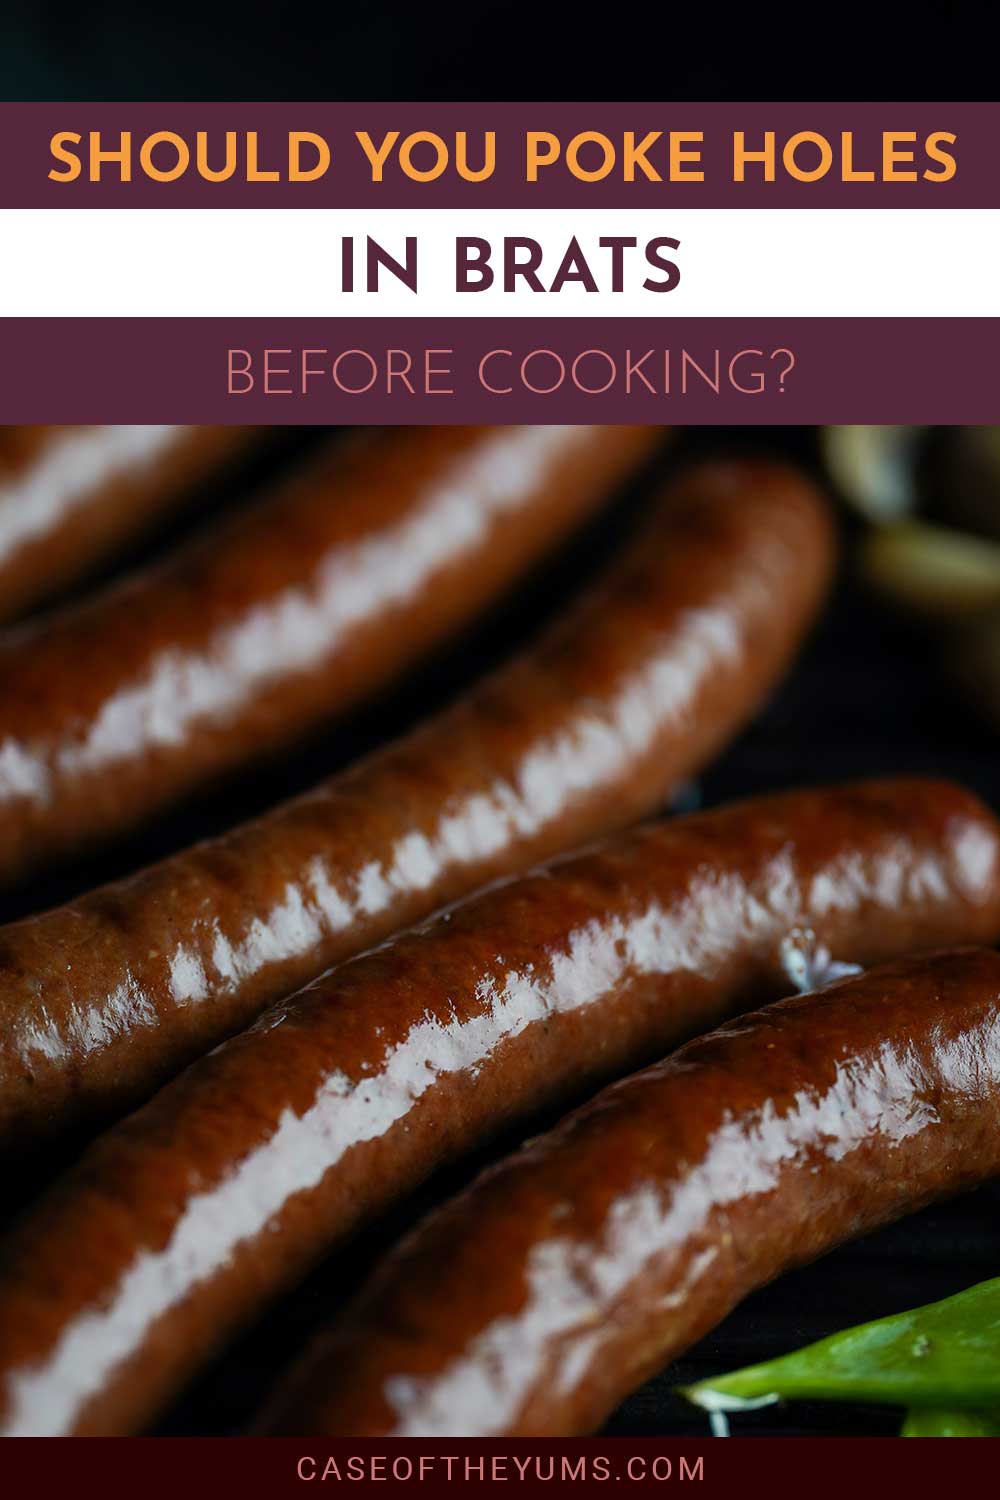 Brats - Should You Poke Holes In them Before Cooking?